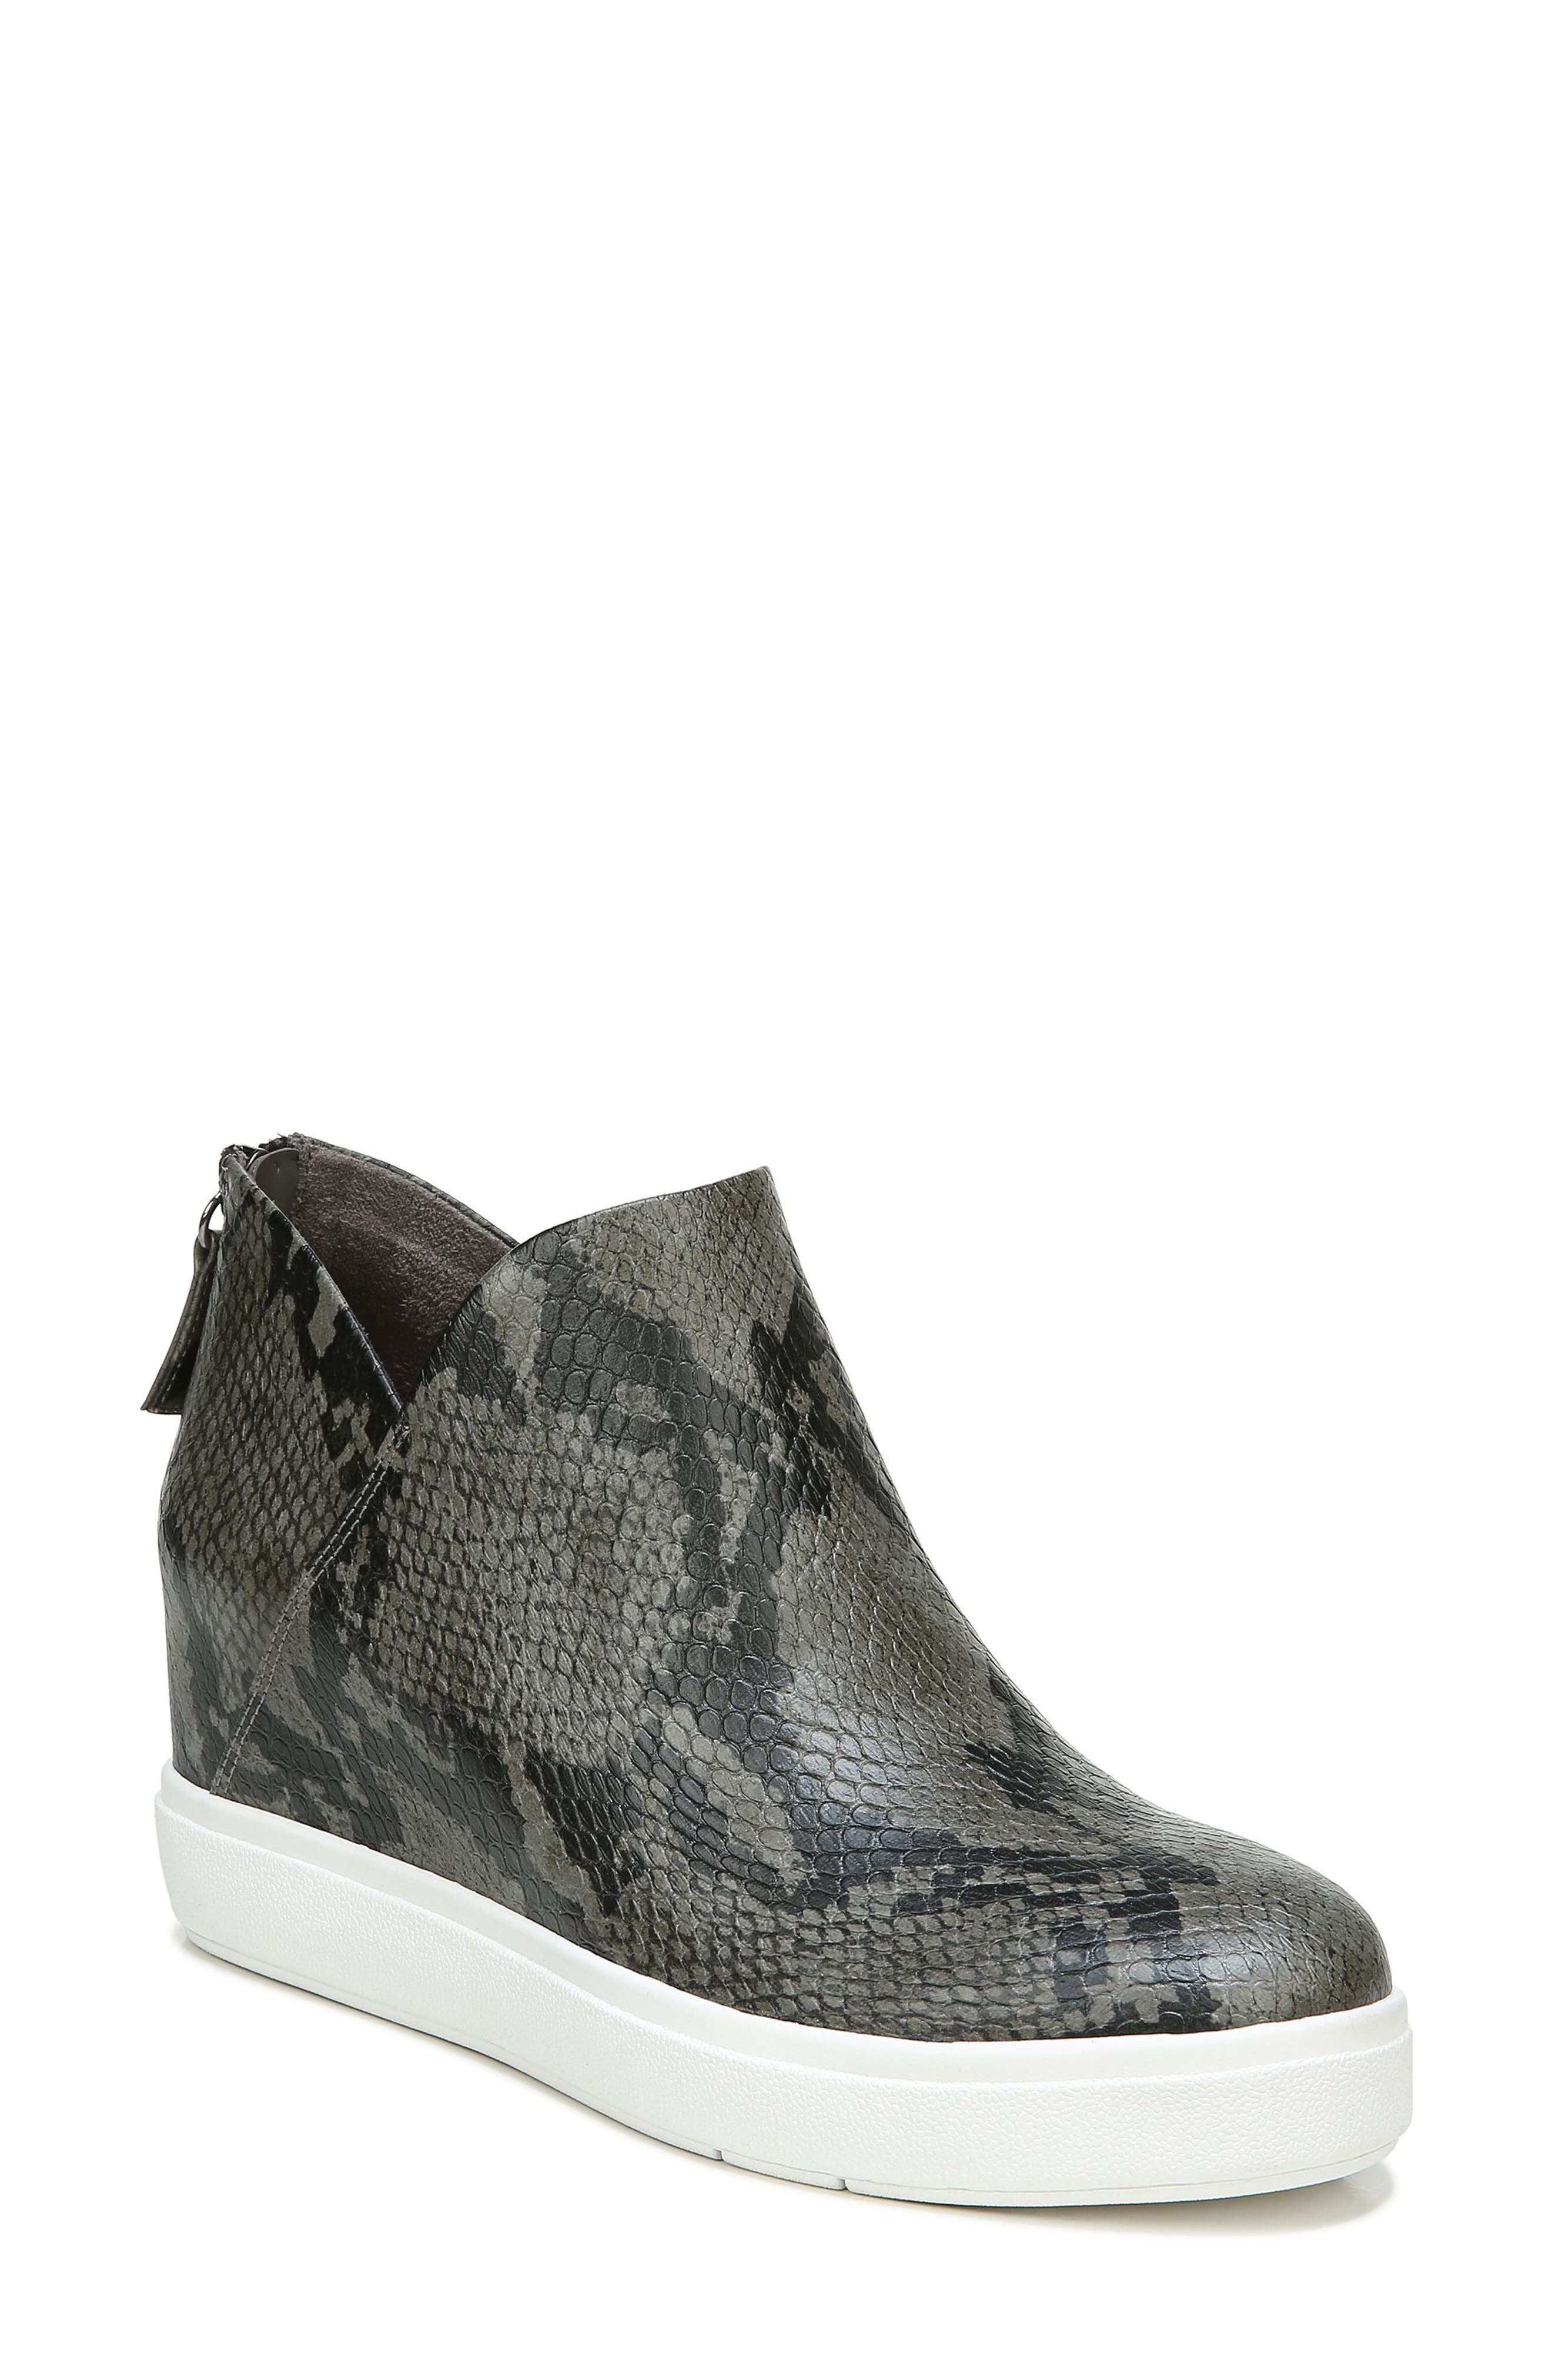 Dr. Scholl's Madison Snake Embossed Hidden Wedge Sneaker In Grey/ Black Faux Leather